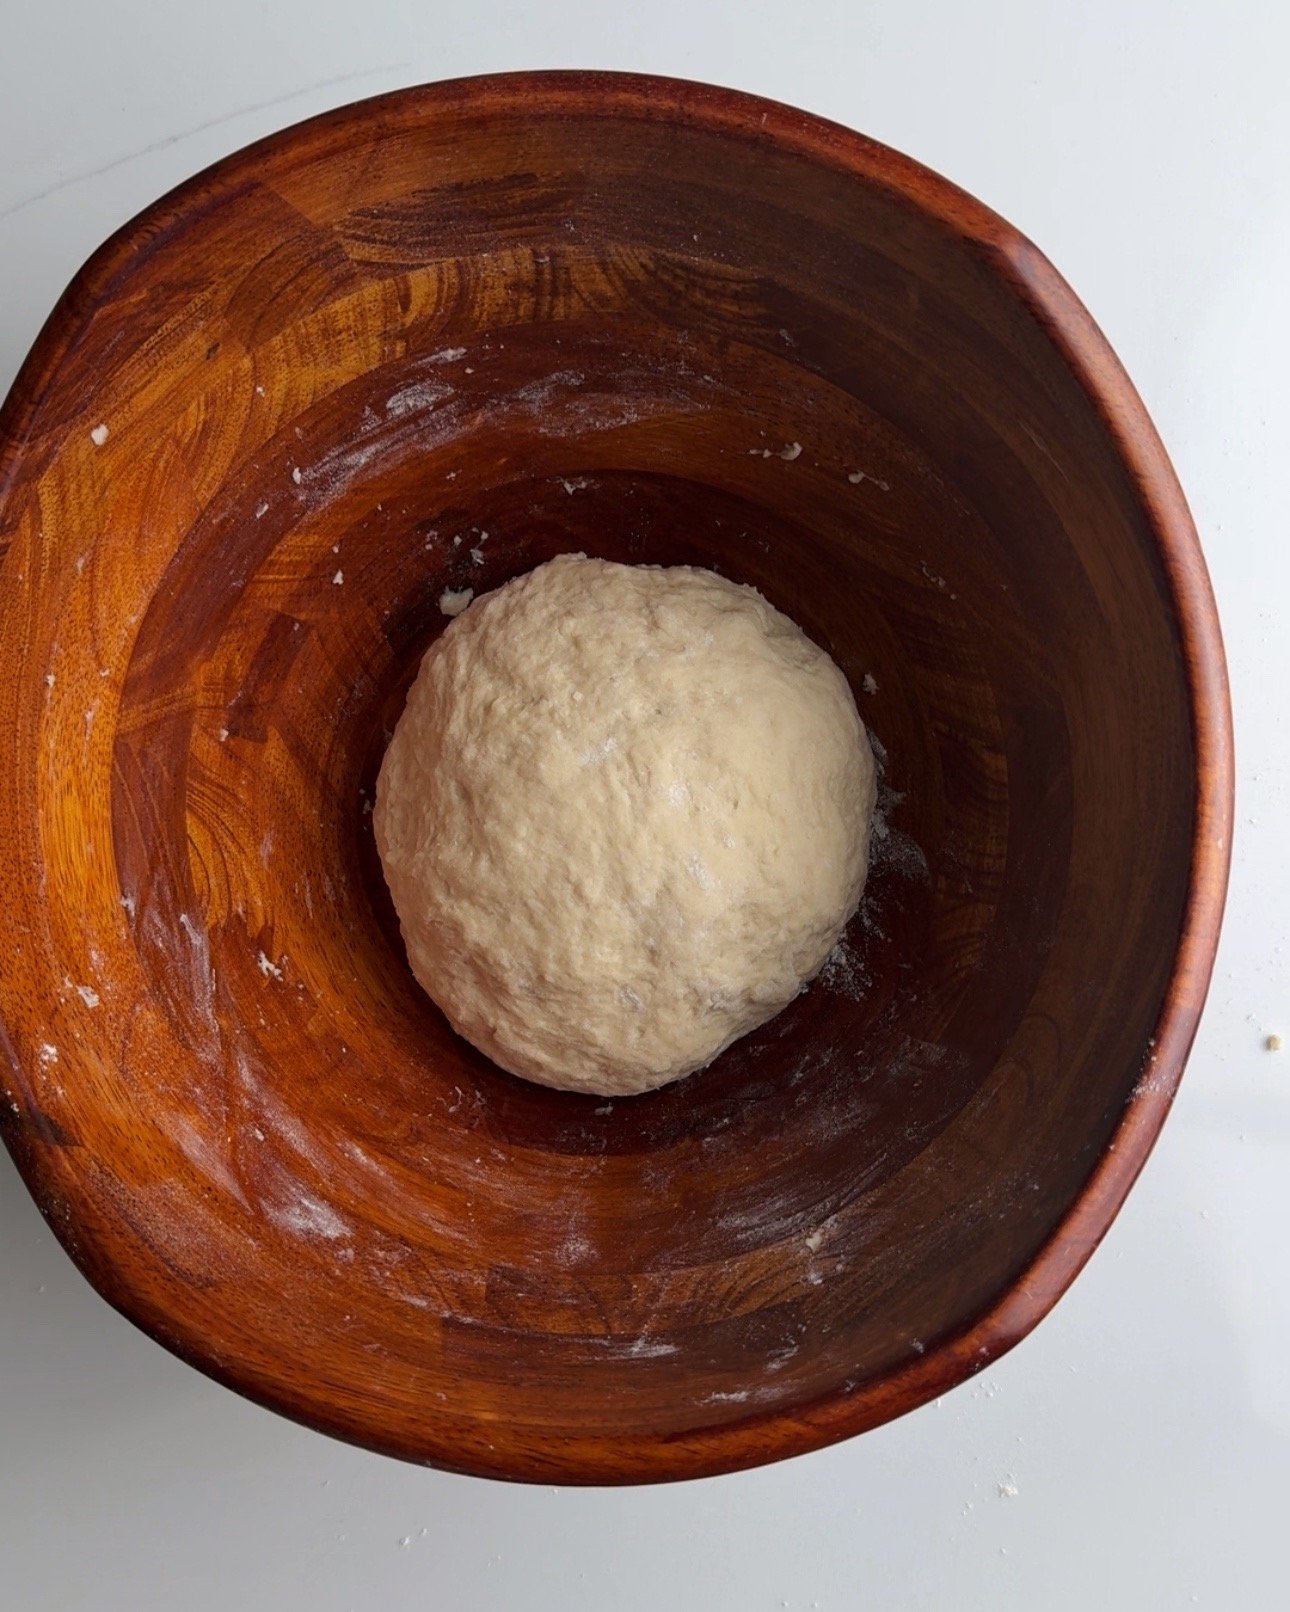 resting the dough in a wooden bowl